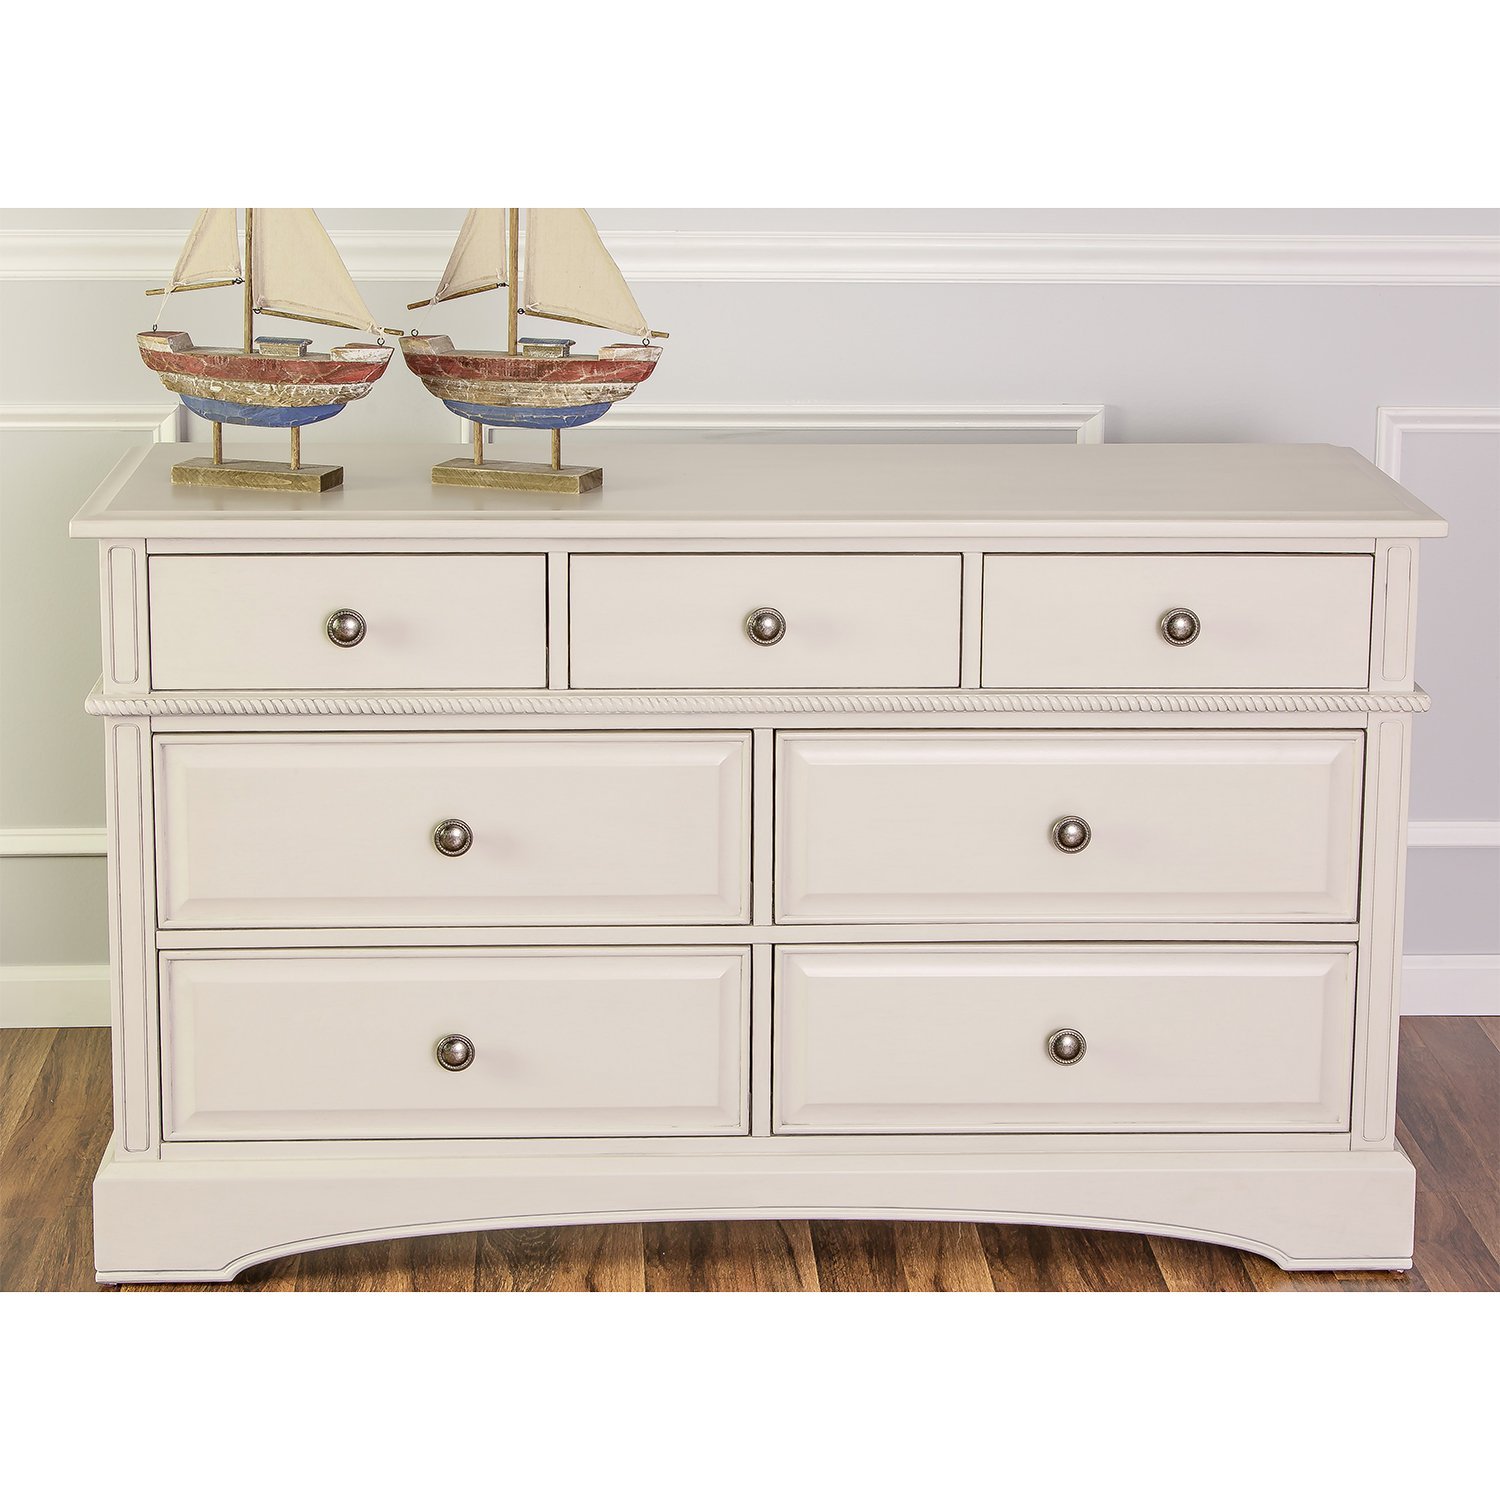 Evolur Double - Drawers Dresser in Antique White